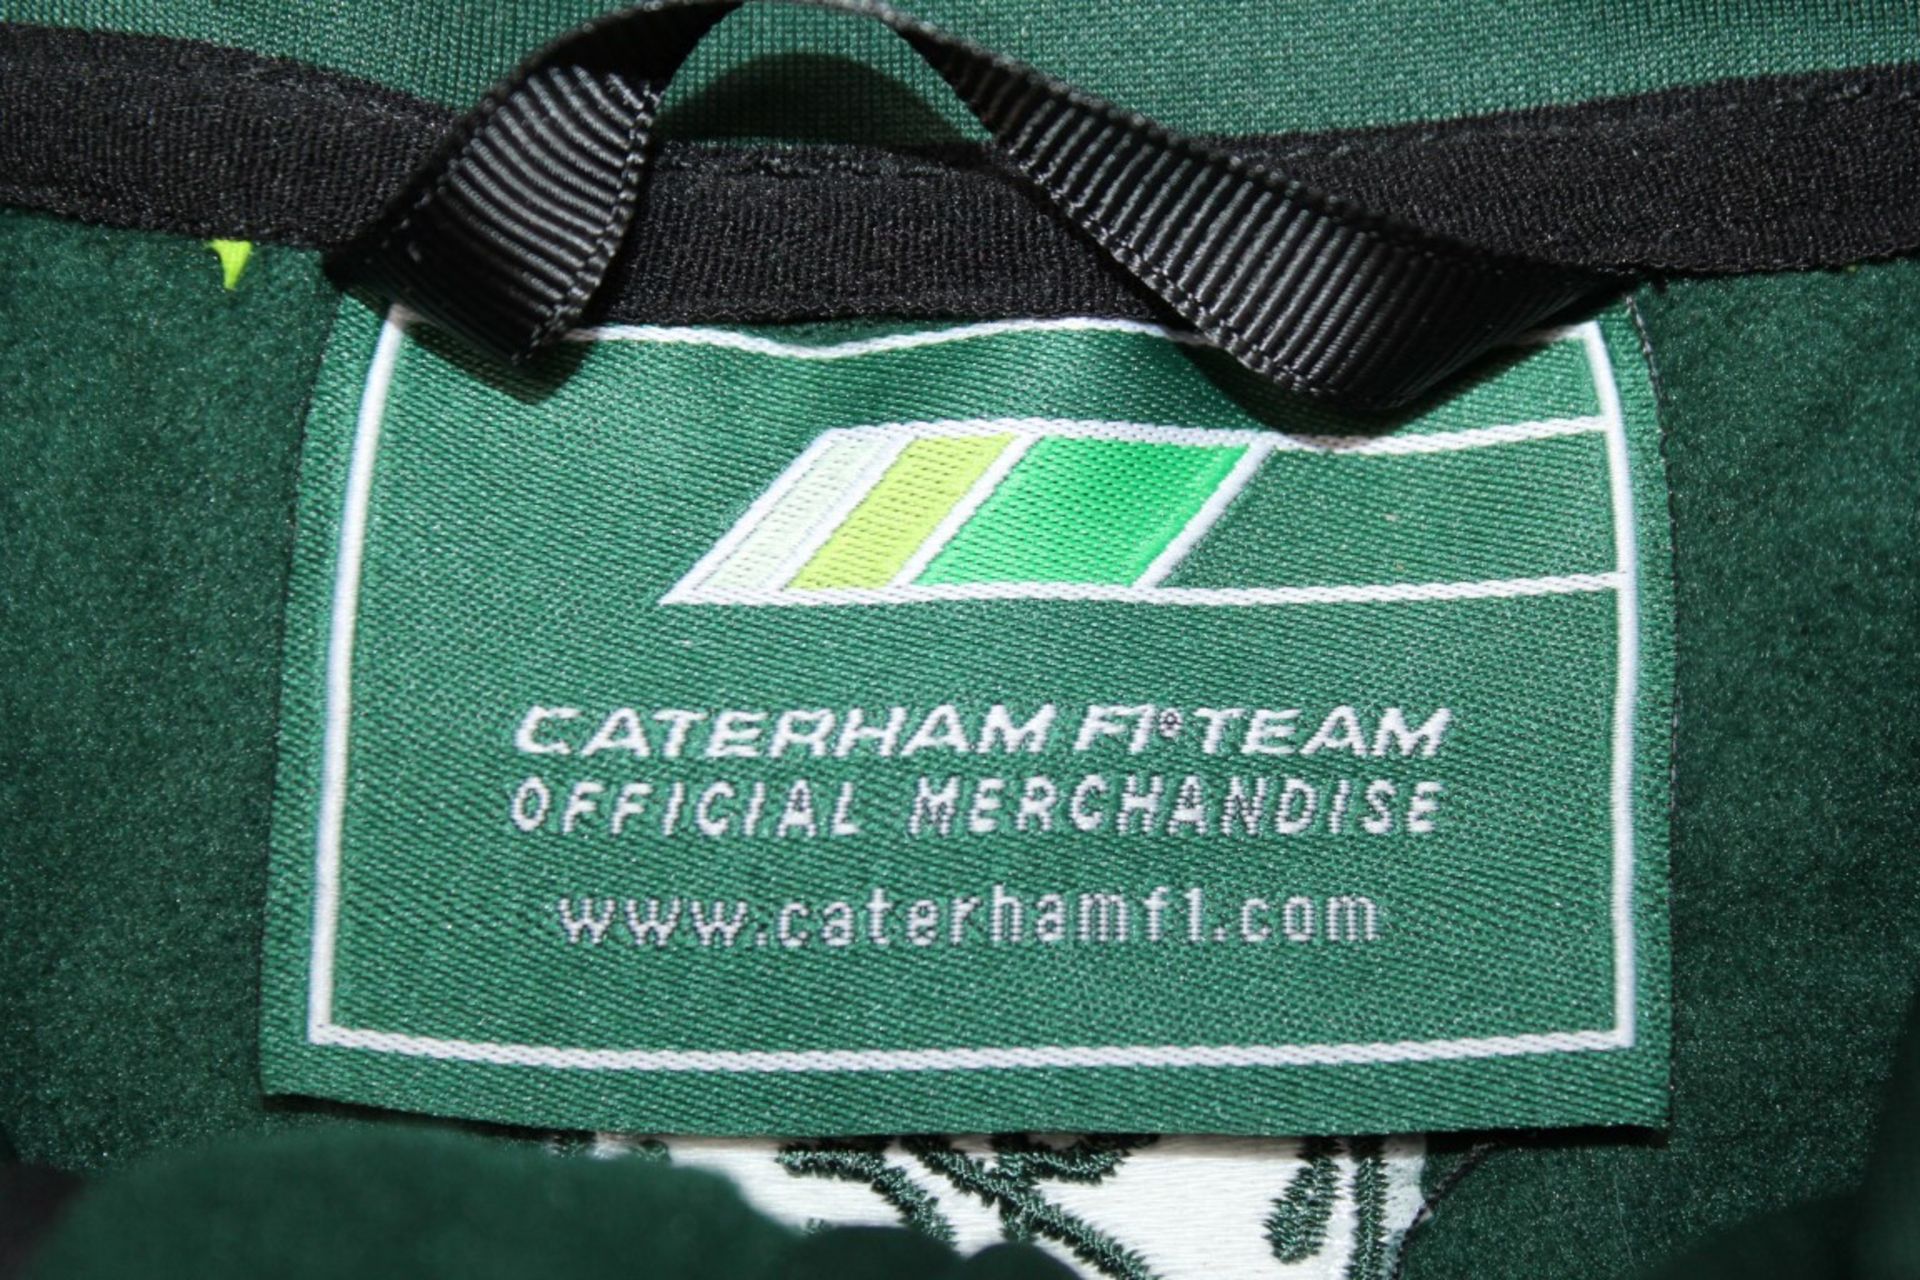 17 x Caterham F1 Team Jackets - An Assortment Of Different Styles & Designs, See Pictures - - Image 5 of 8